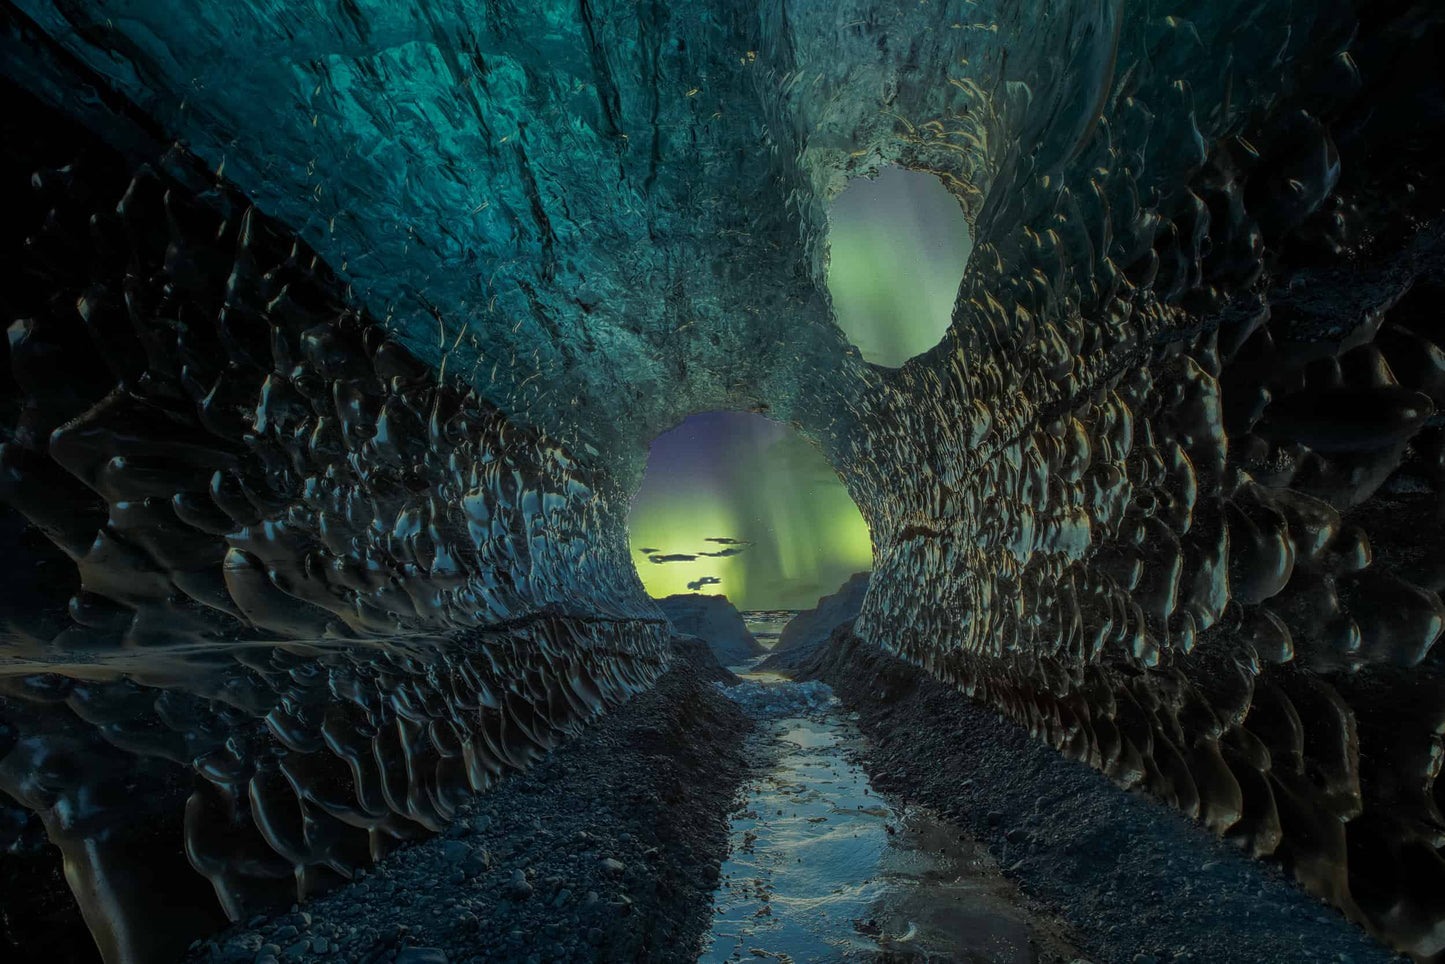 The artpiece 'Scattering Aurora' by Markus van Hauten which shows the aurora as seen from an ice cave, while the aurora is subtly lighting the cave walls.